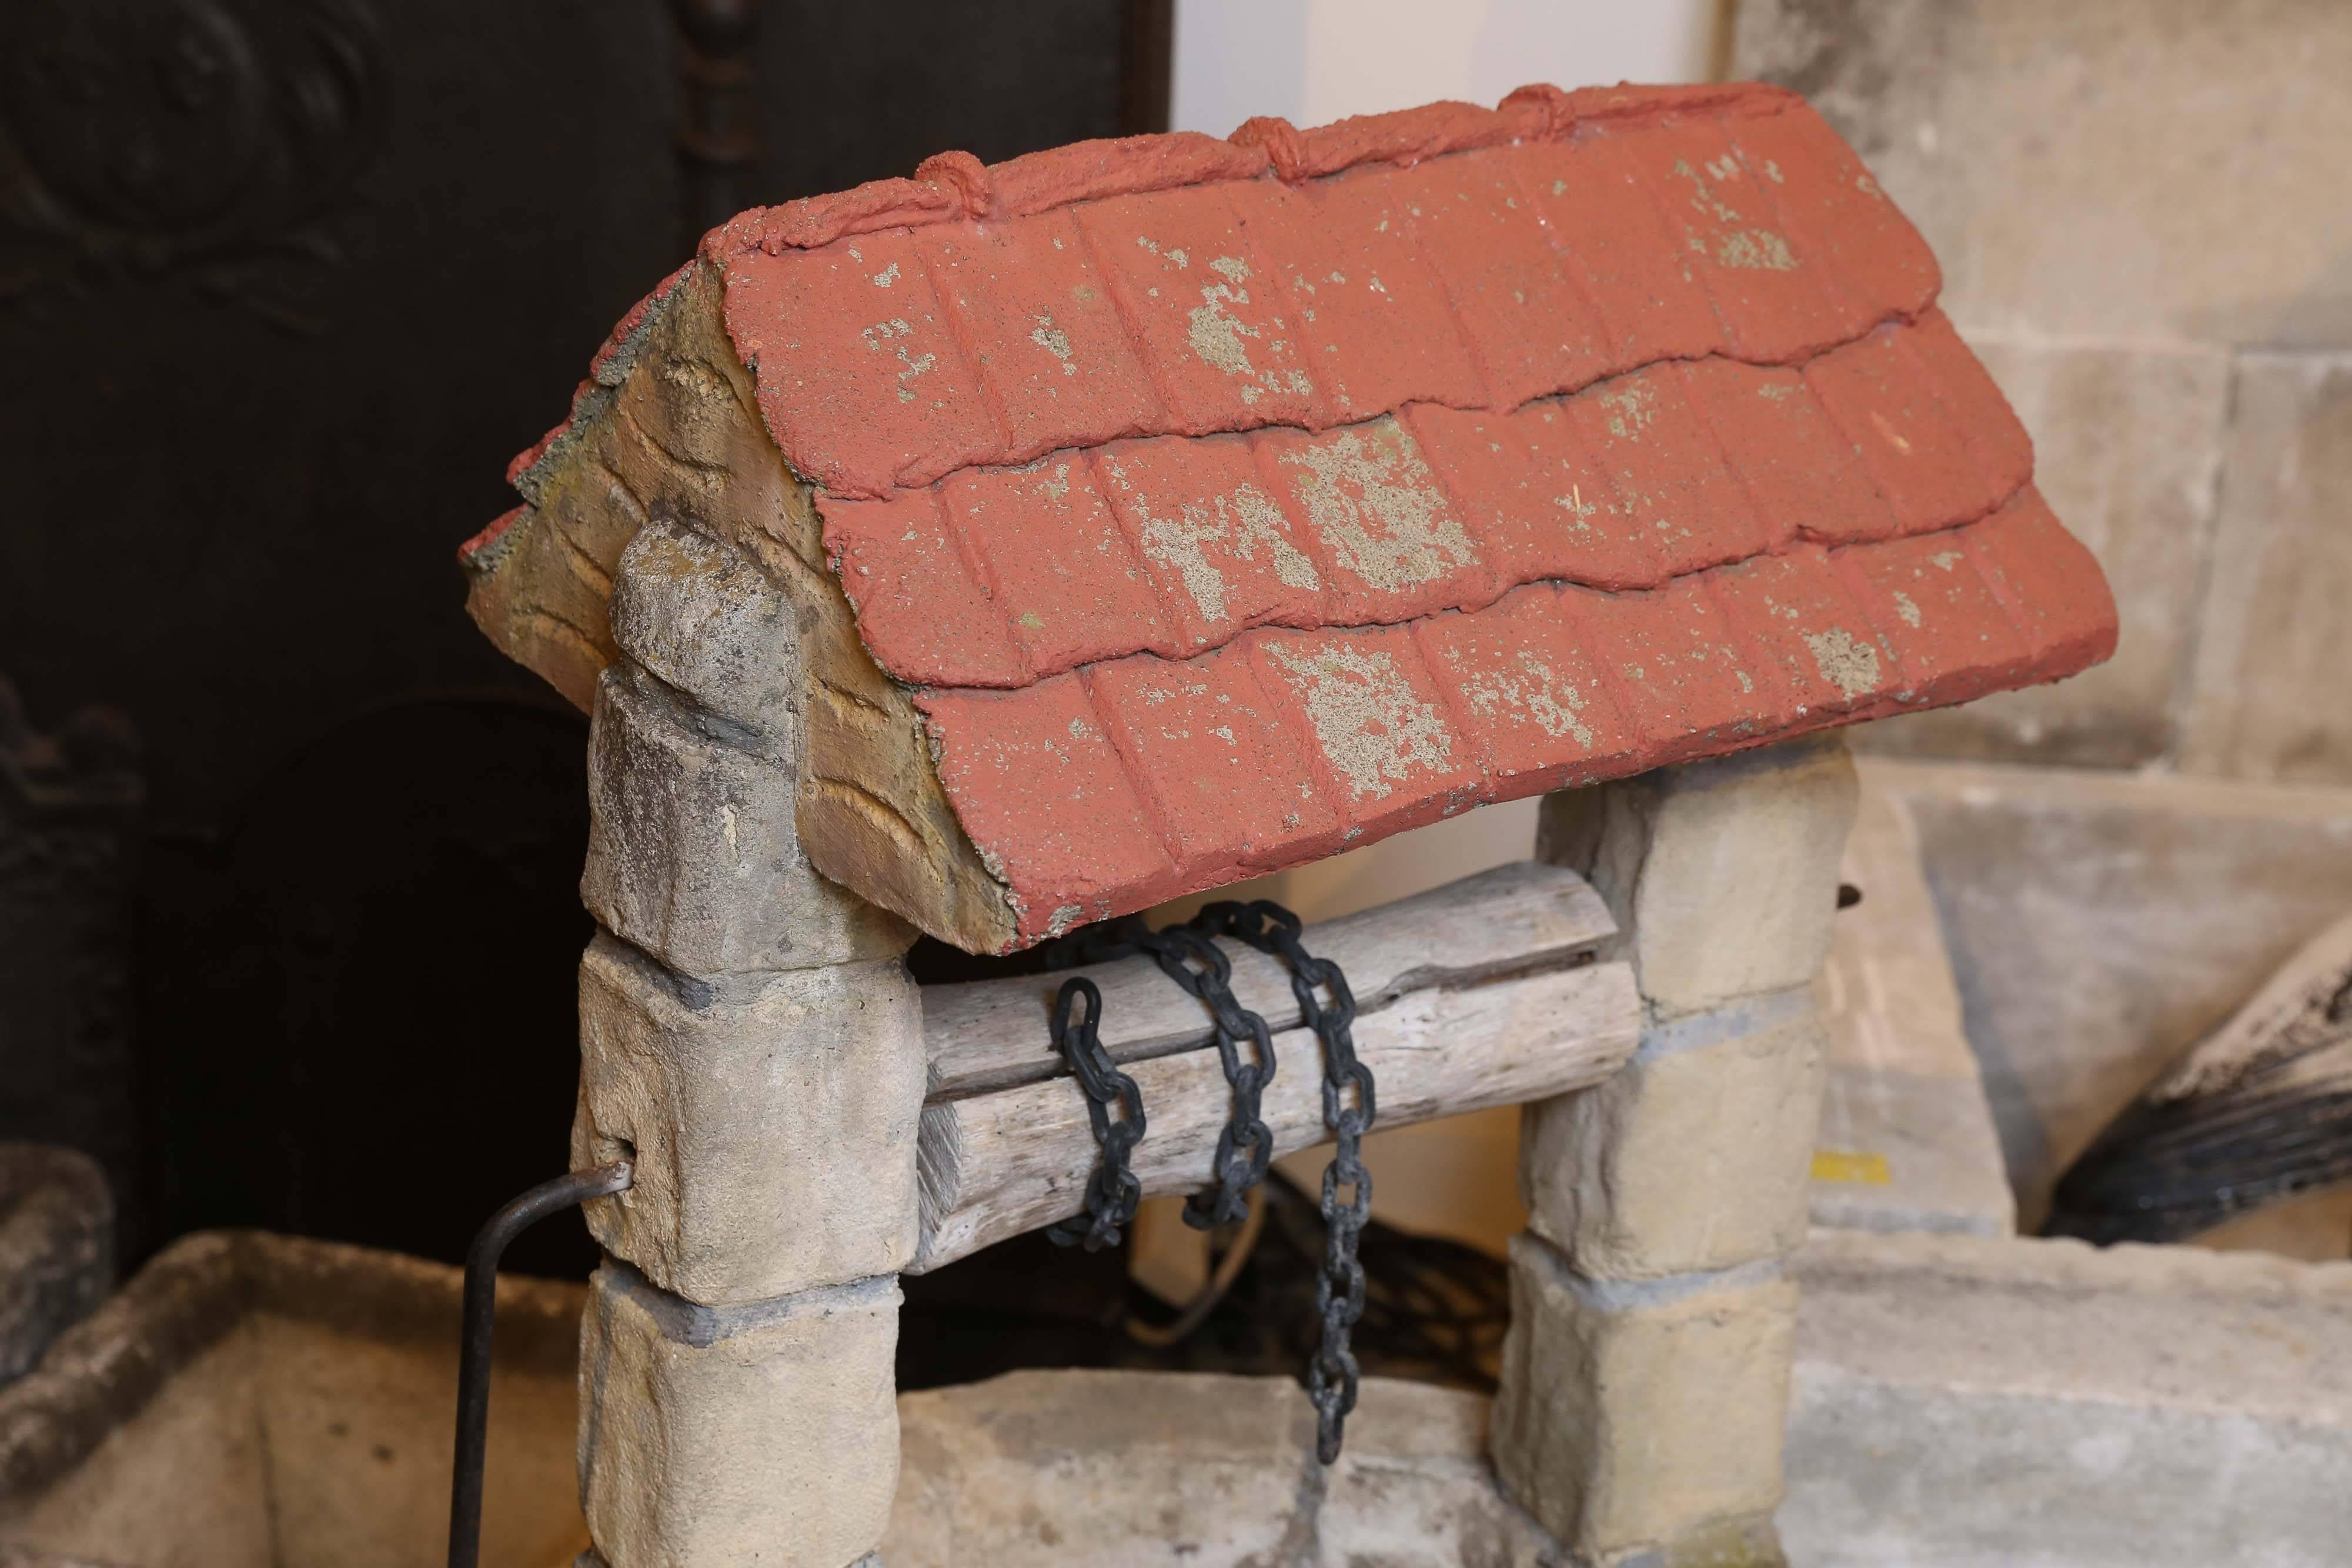 A charming concrete wishing well from France. A metal hand crank turns a wooden spindle with a chain attached for a bucket. The roof has worn terracotta paint. Add some magic to a shady spot in the garden.